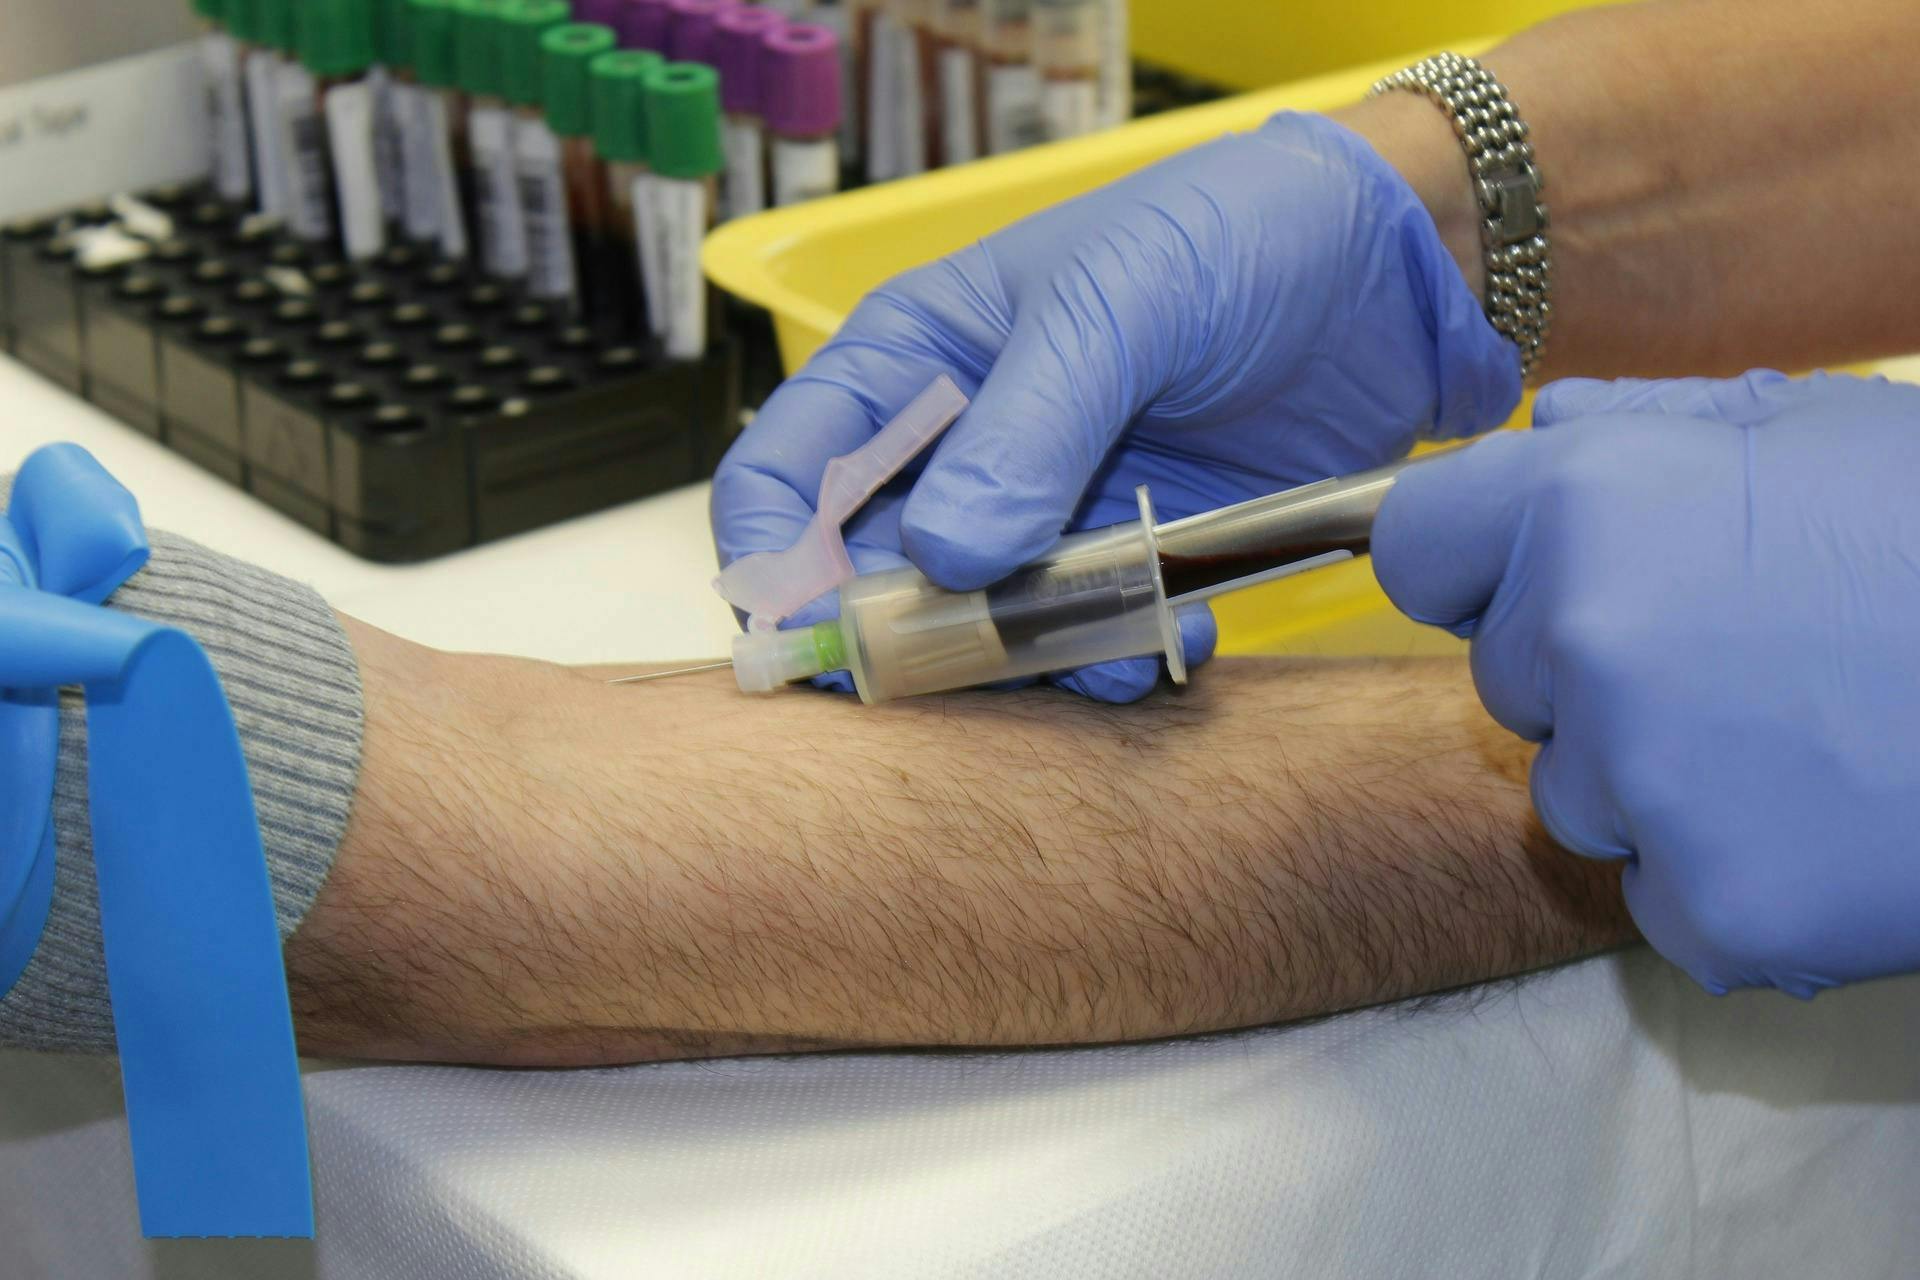 A medical professional, wearing blue gloves, draws blood from a patient’s arm using a syringe; background includes test tubes in a rack.